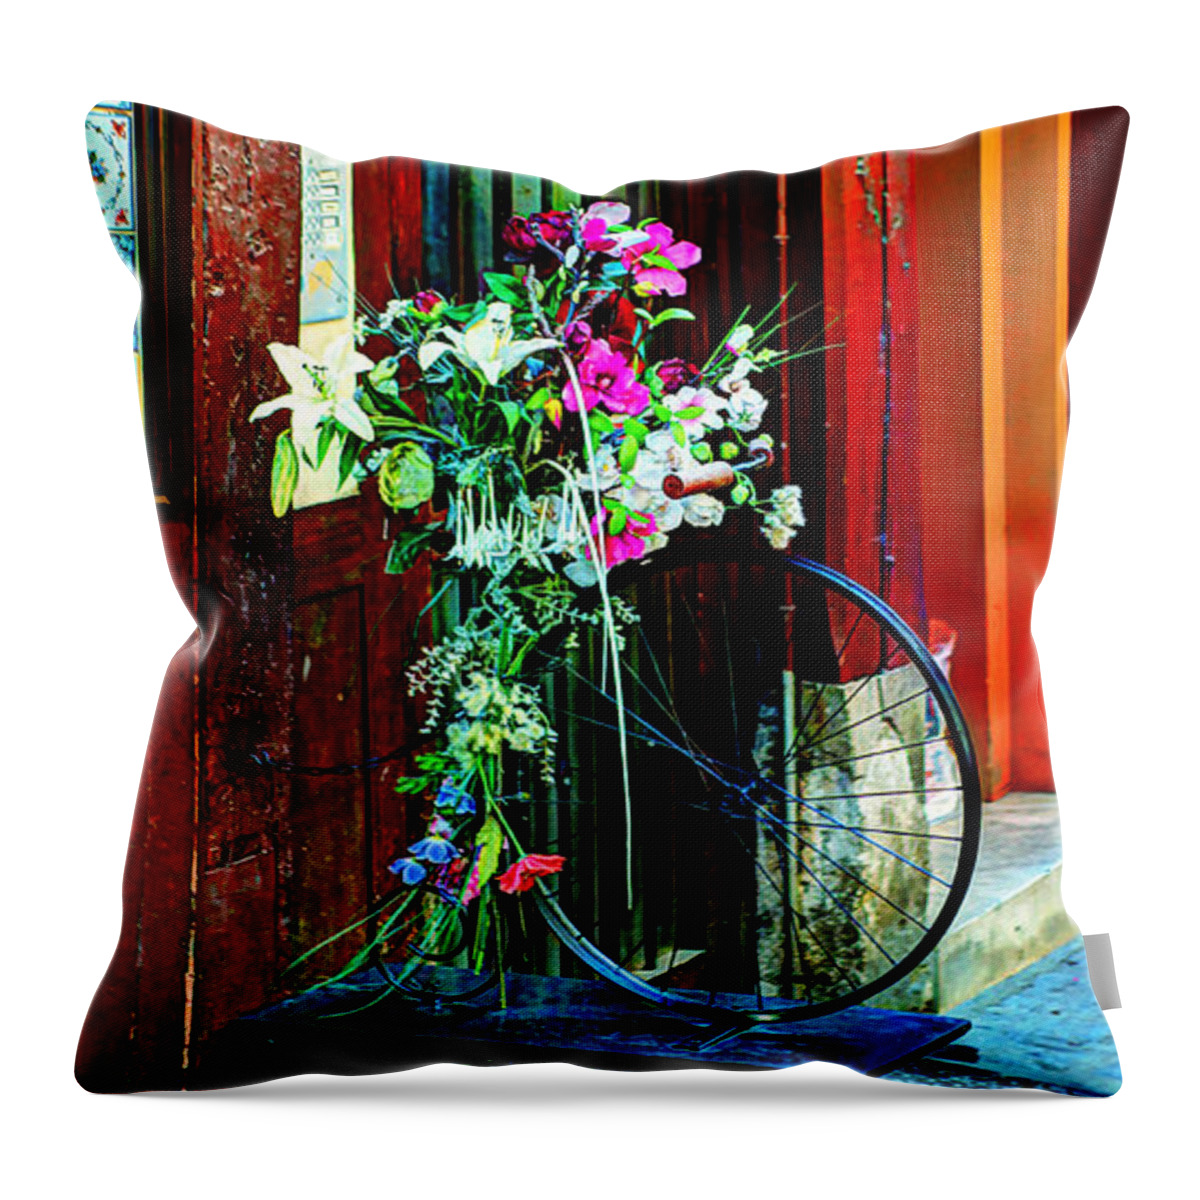 Europe Throw Pillow featuring the photograph Le Potier Rouen France by Tom Prendergast